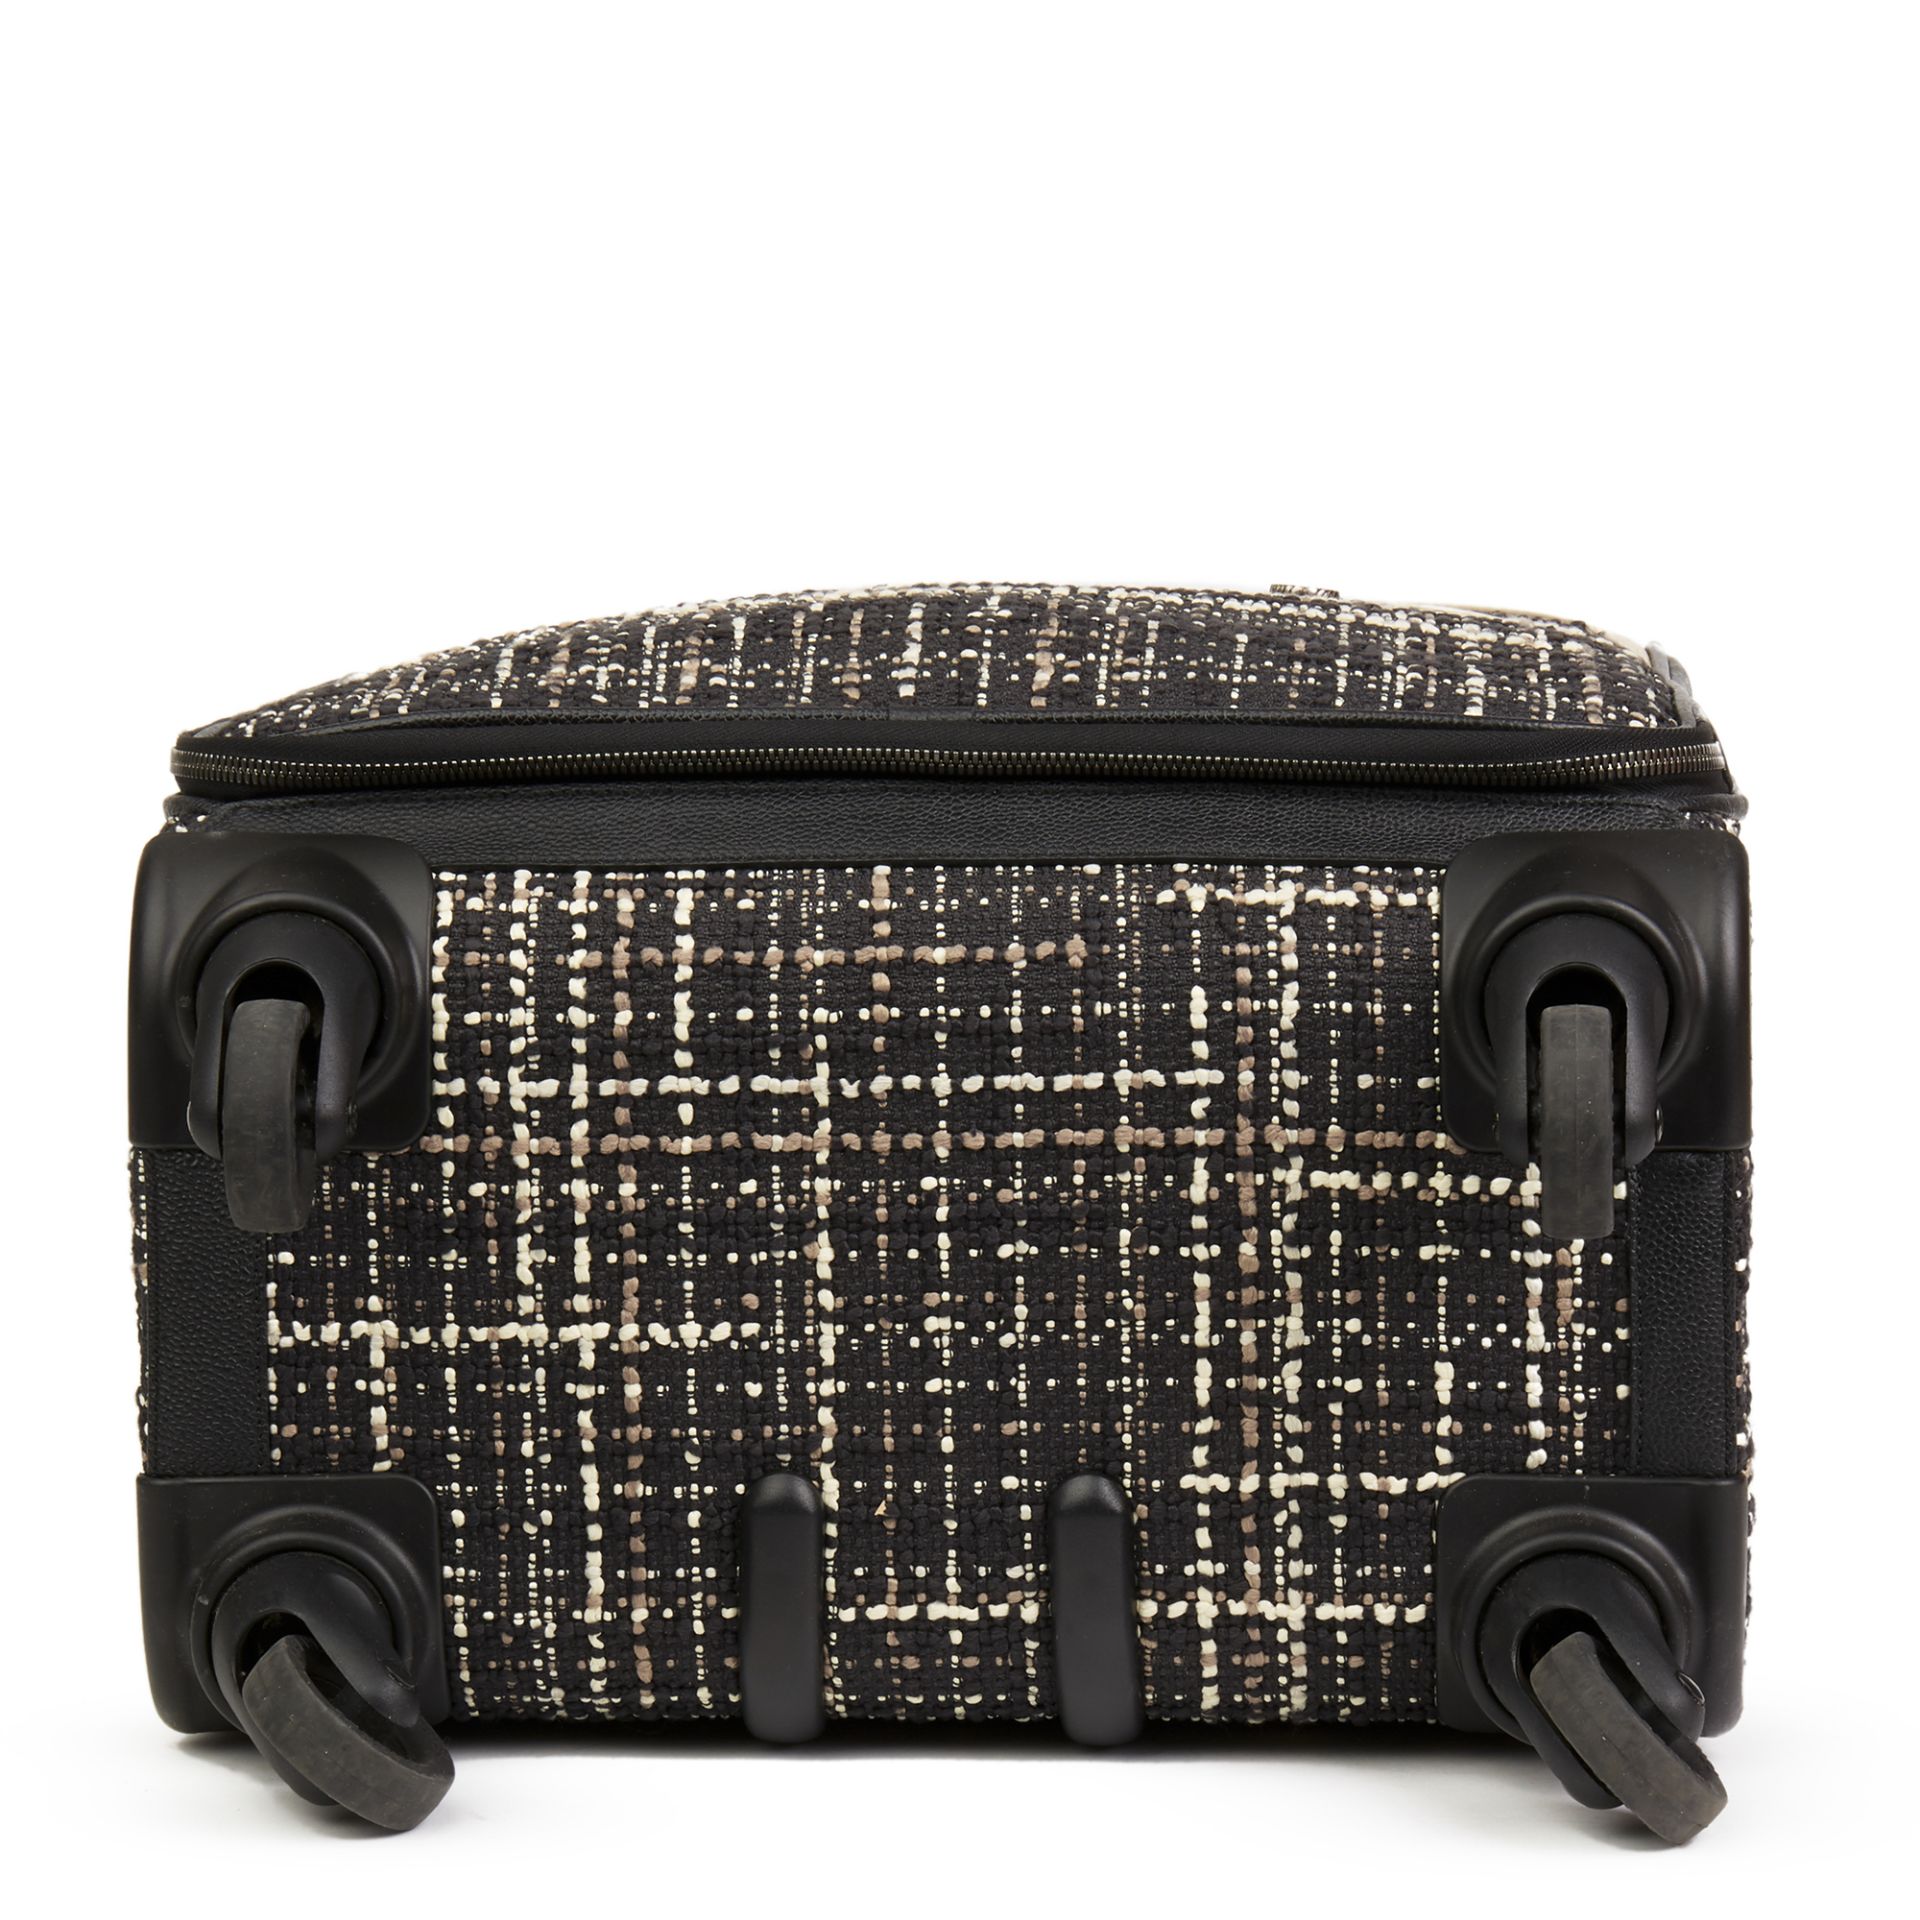 Chanel Jacket Trolley Rolling Suitcase - Image 11 of 13